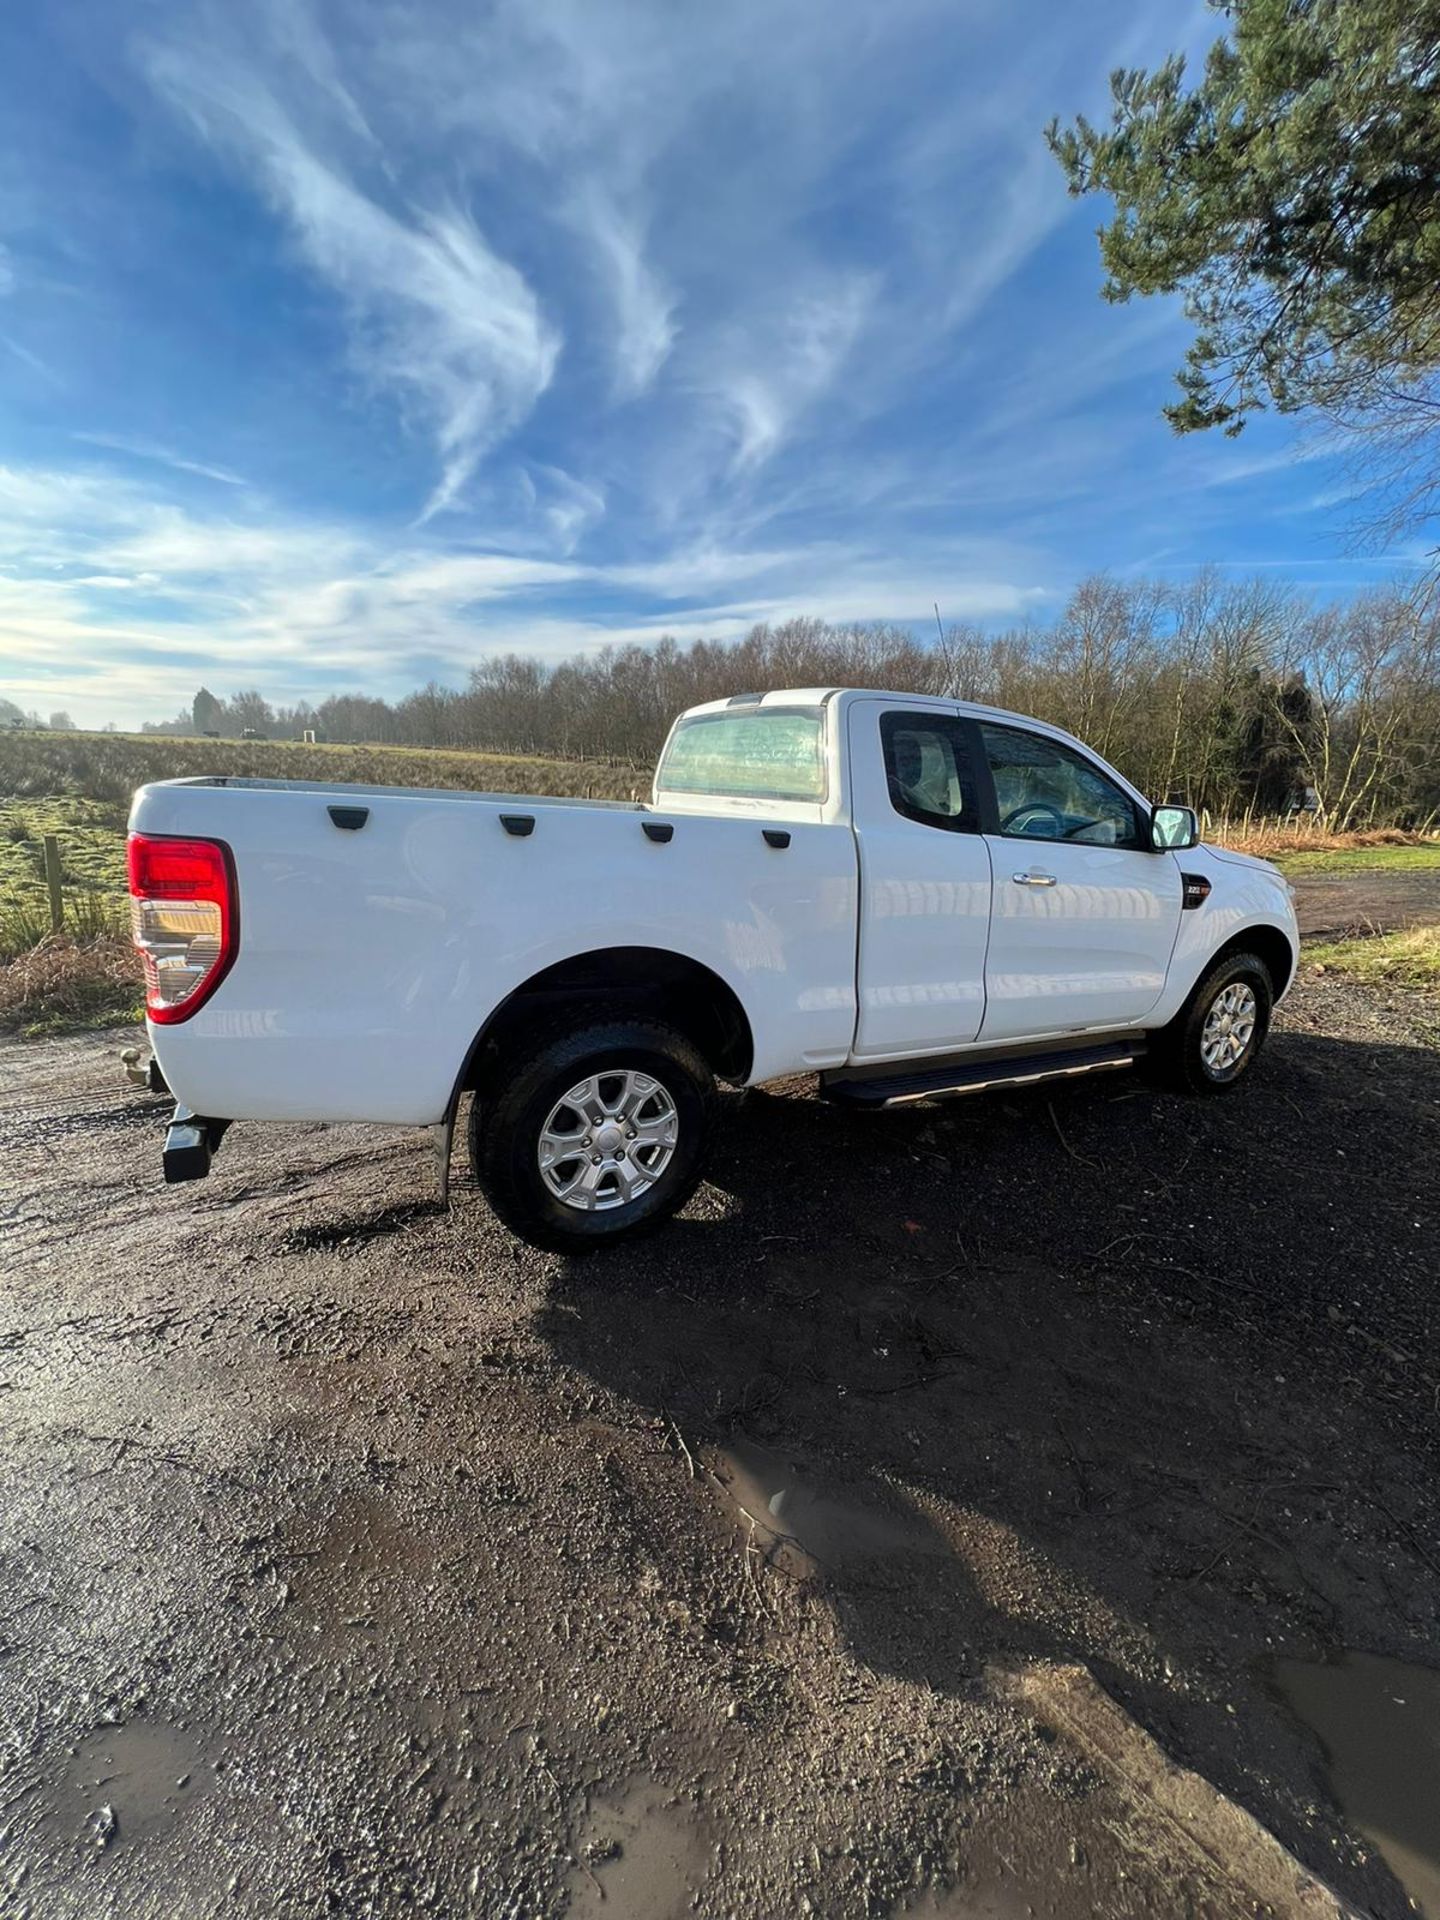 2017 FORD RANGER KING CAB EXSTRA CAB CAB AND HALF - Image 2 of 19